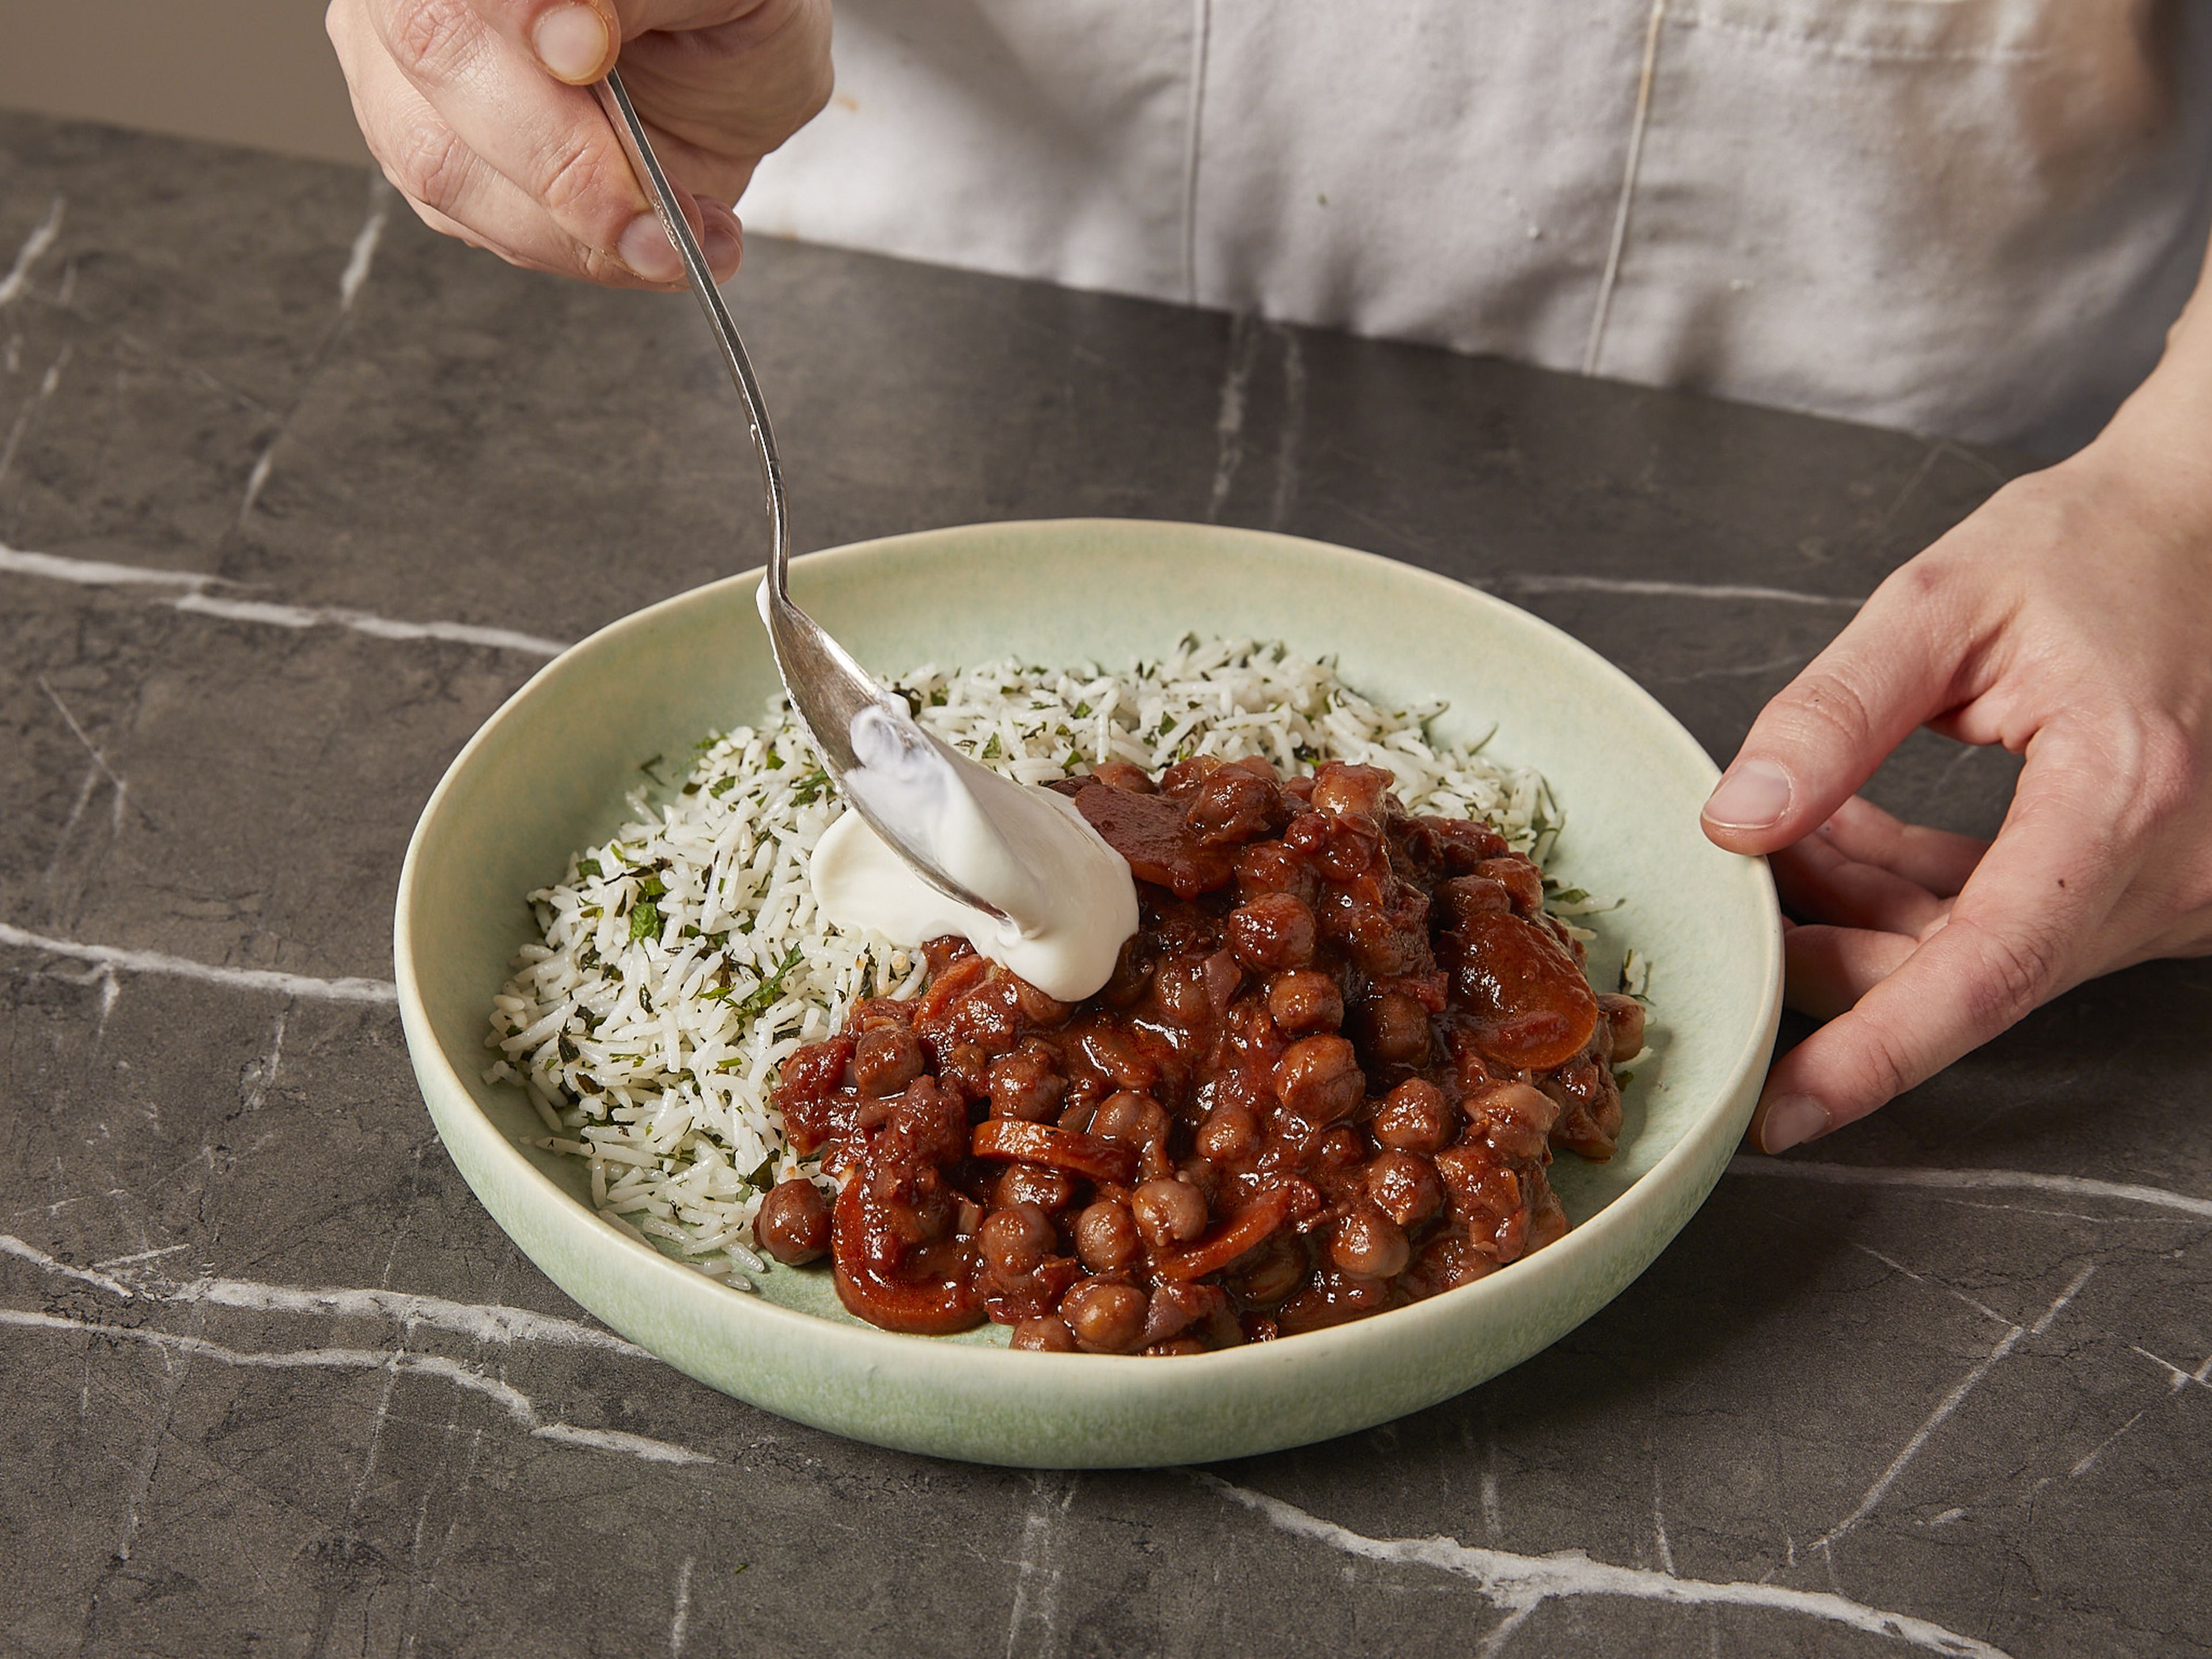 Serve braised chickpeas with the herby rice, a dollop of Greek yogurt and the remaining herbs.